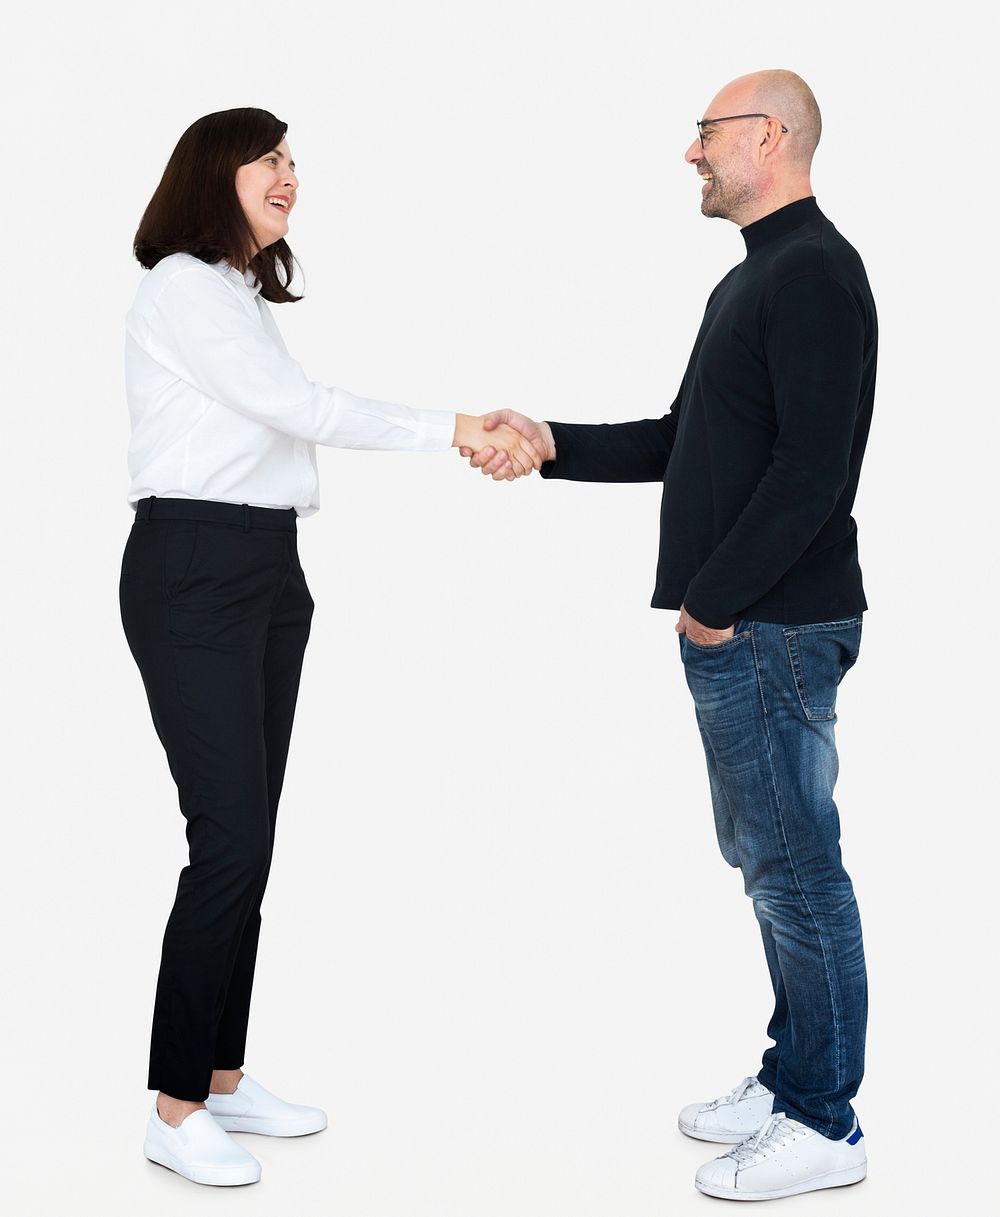 Business partners in a handshake